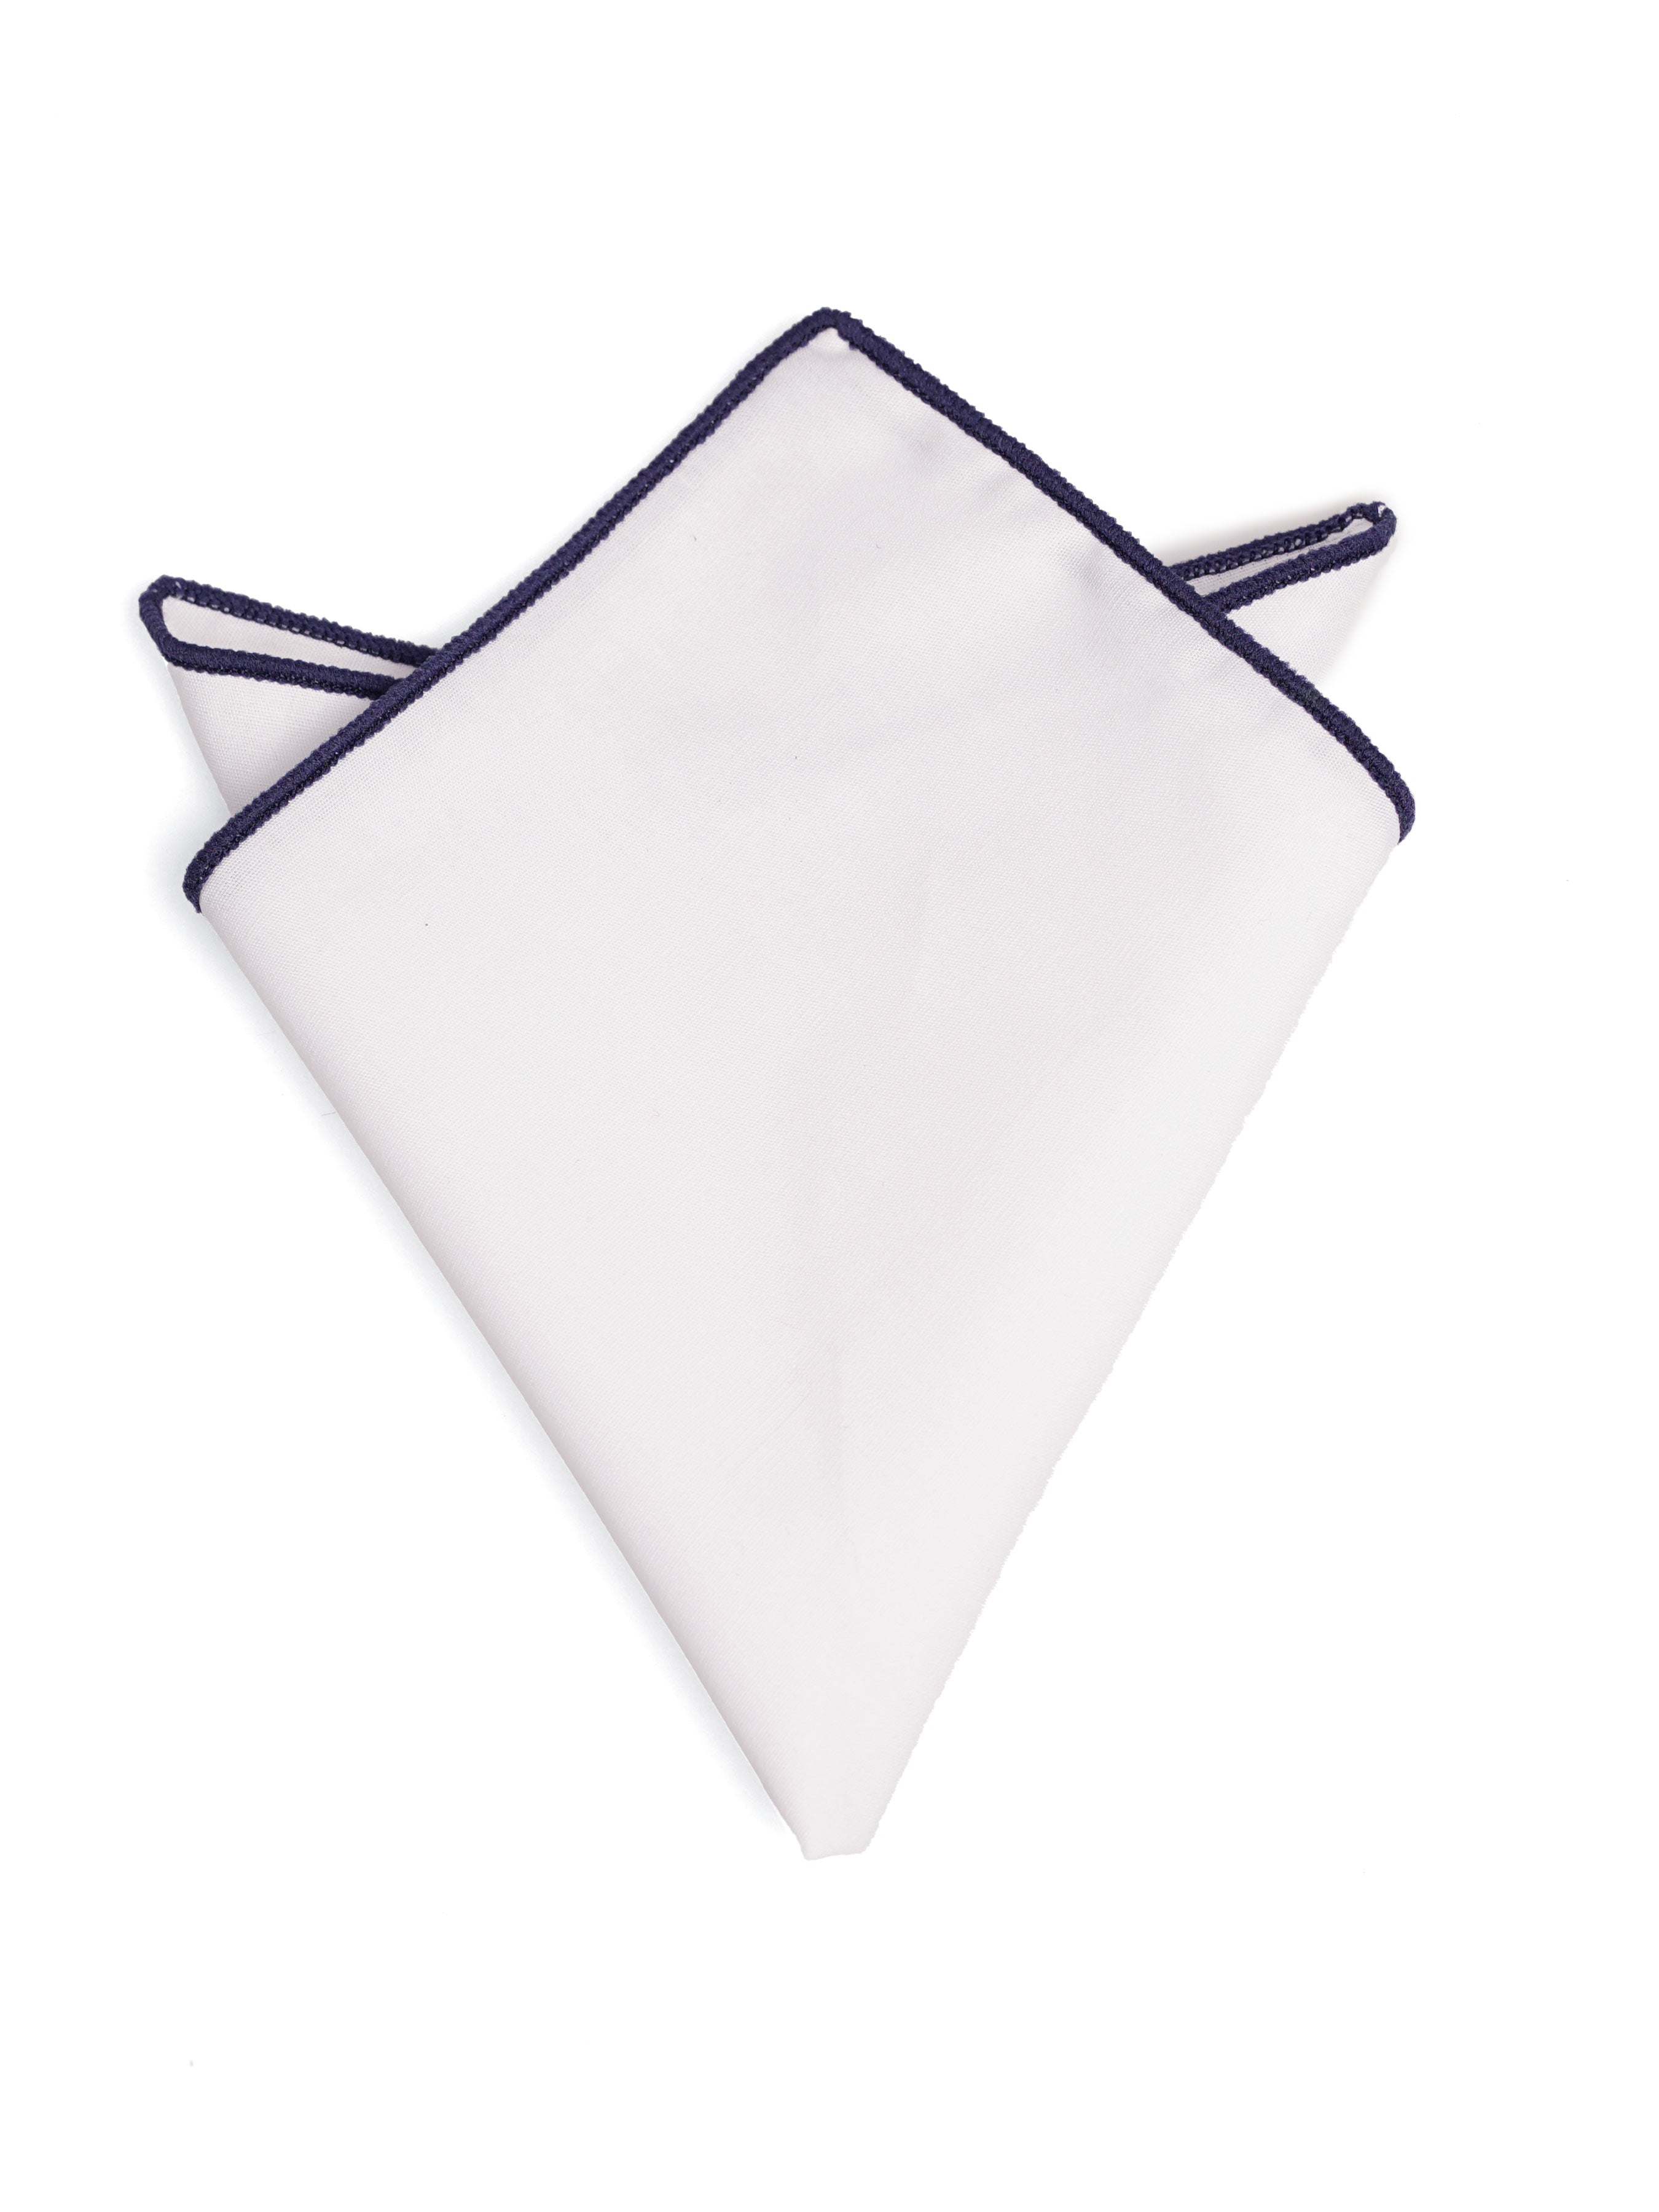 Cotton White Pocket Square with Contrast Piping - Zeve Shoes